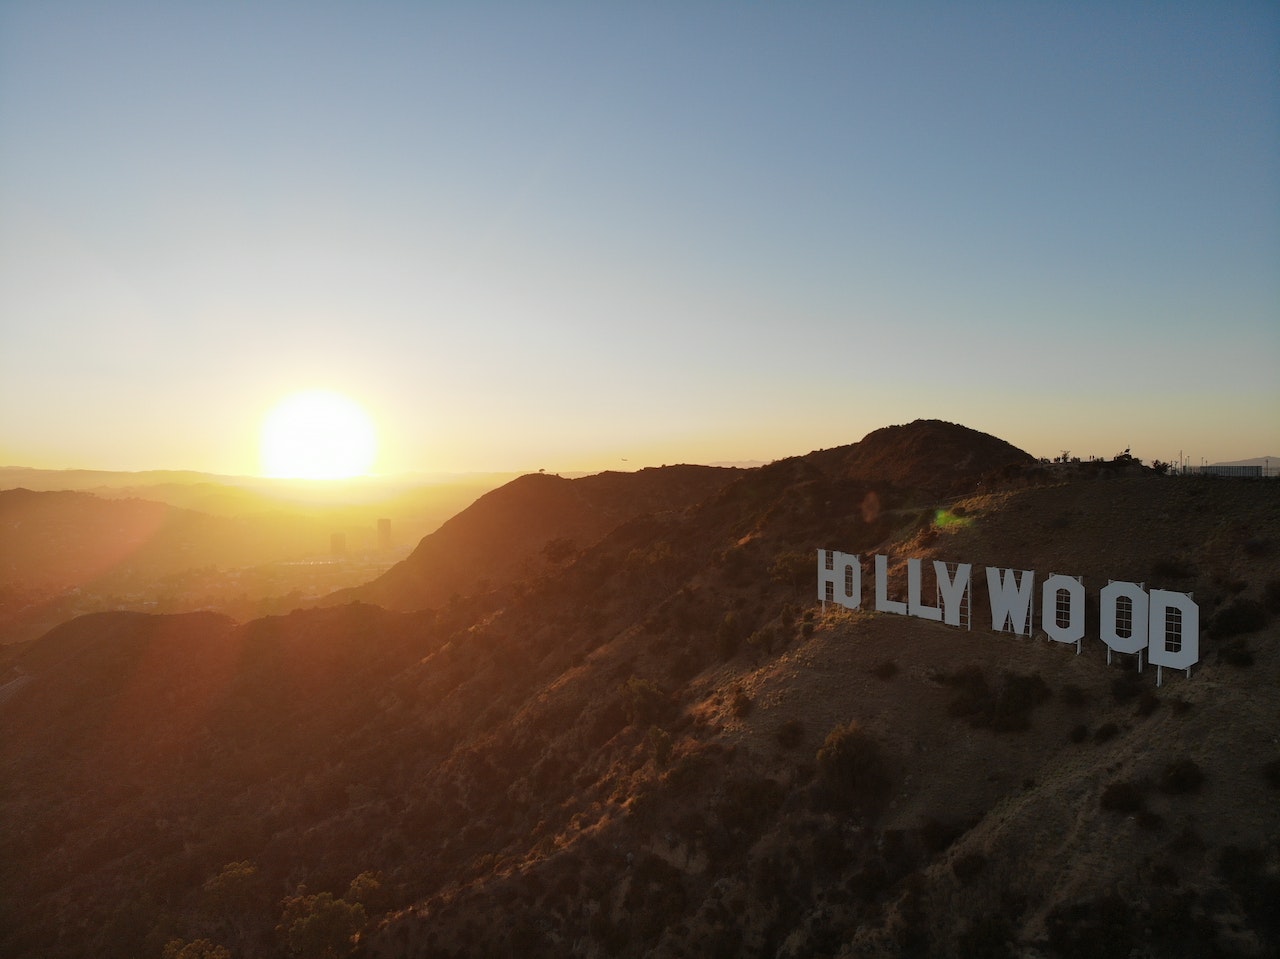 5 Ways Hollywood Is Becoming More Eco-Conscious